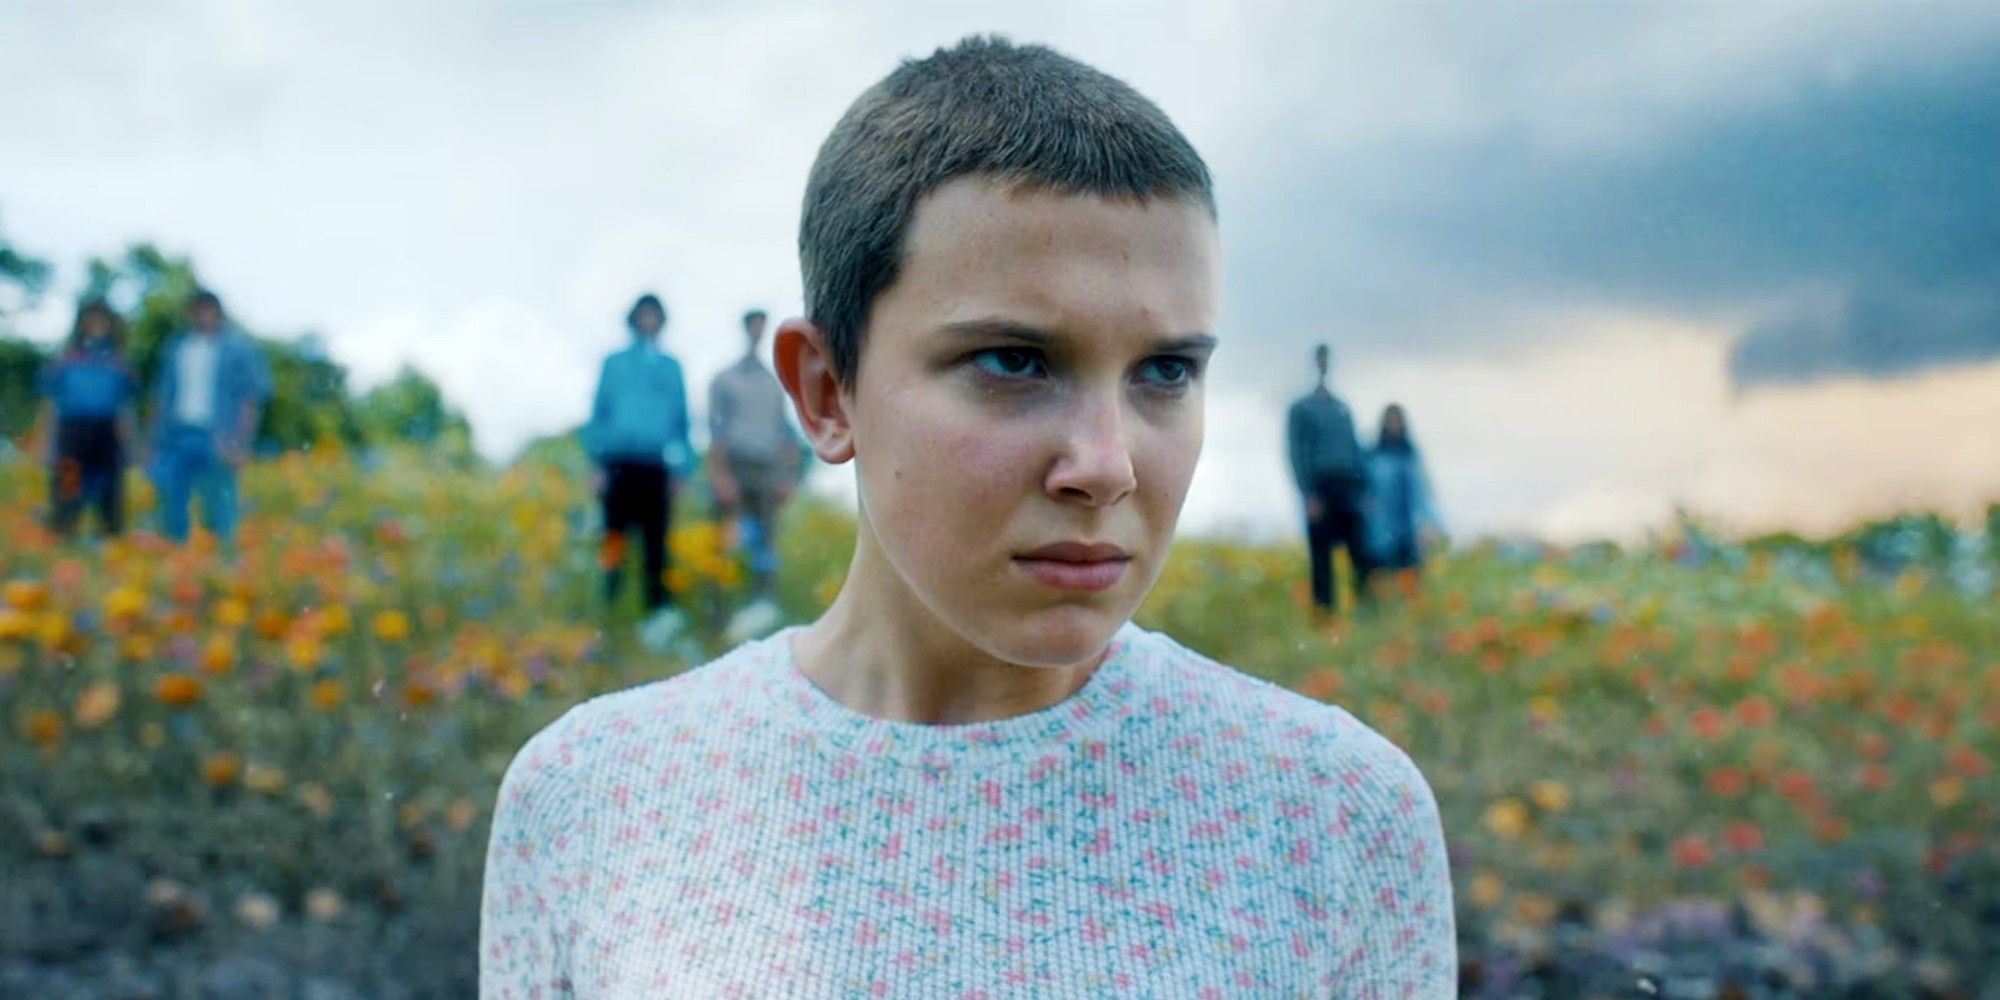 Millie Bobby Brown as Eleven looking to the distance in Stranger Things 4